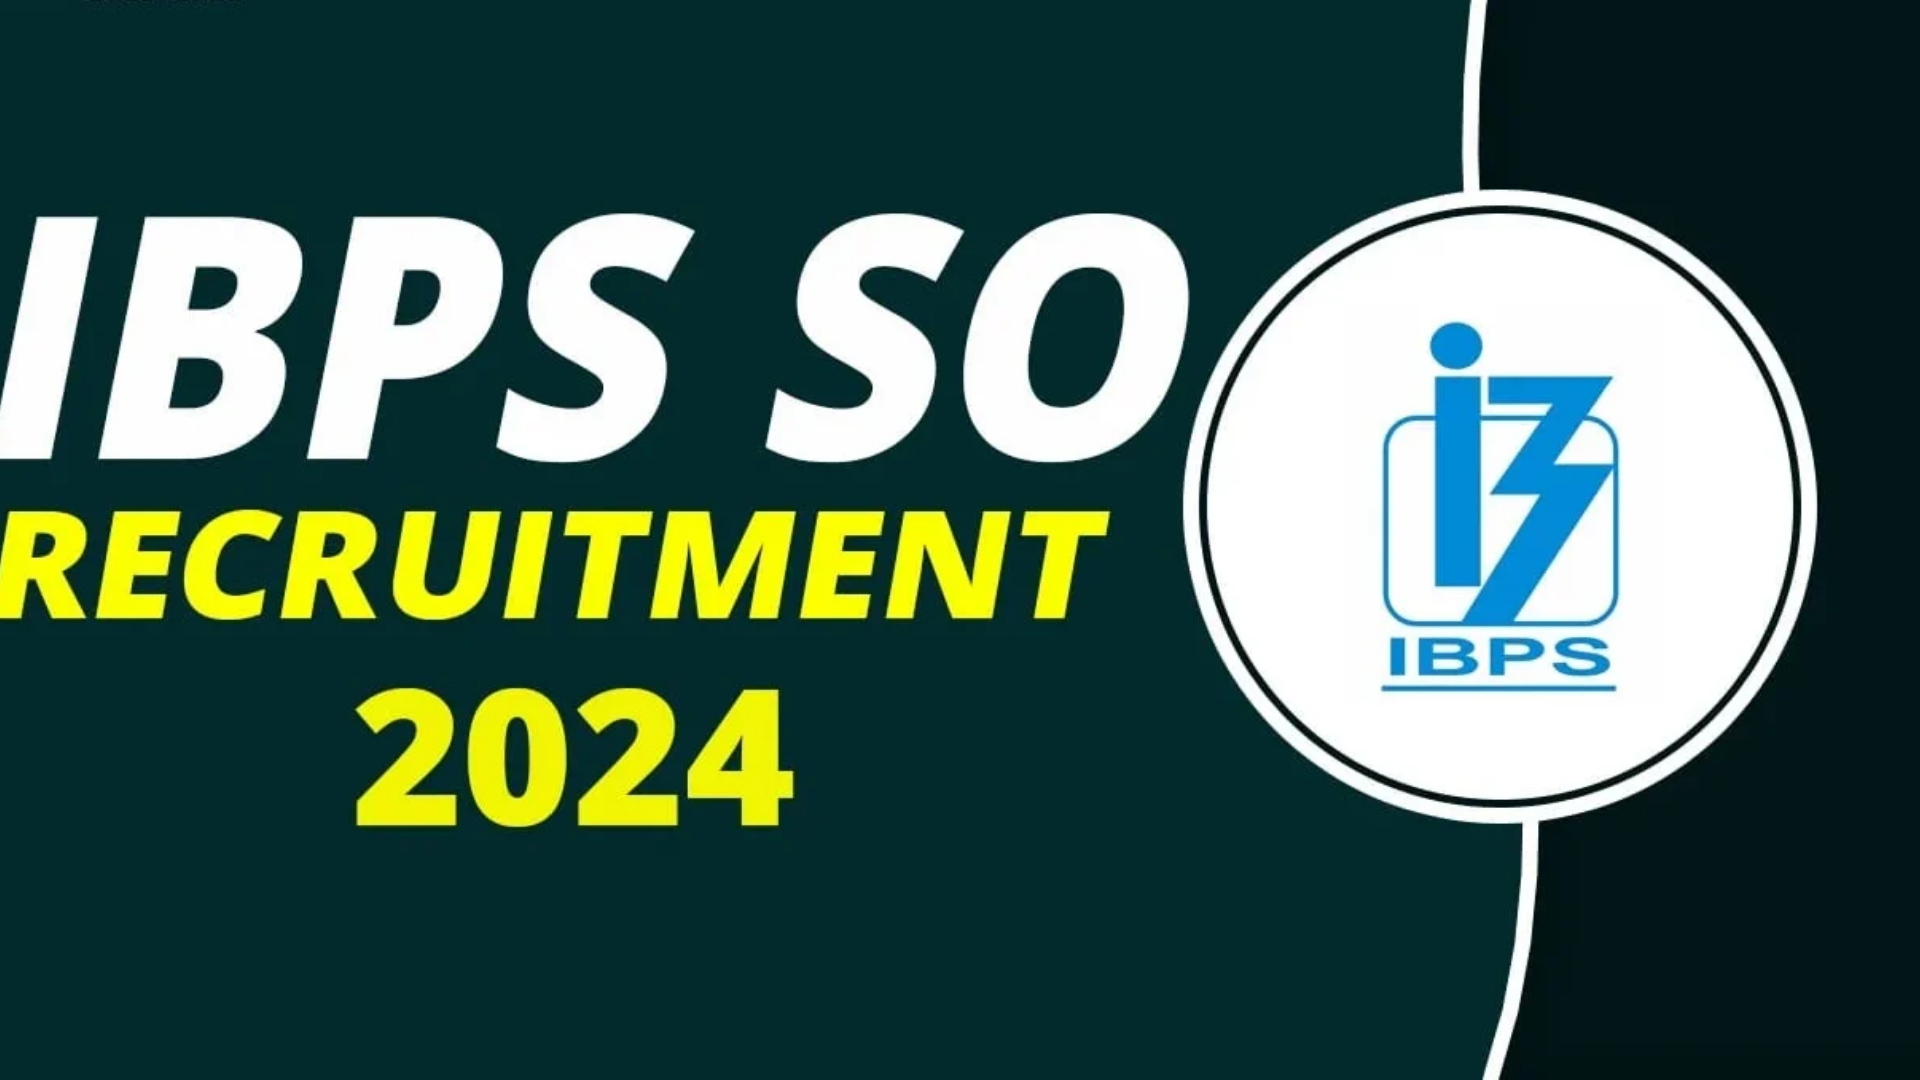 IBPS Recruitment 2024: Last Day To Apply, Check How To Apply For +9,000 Vacancies